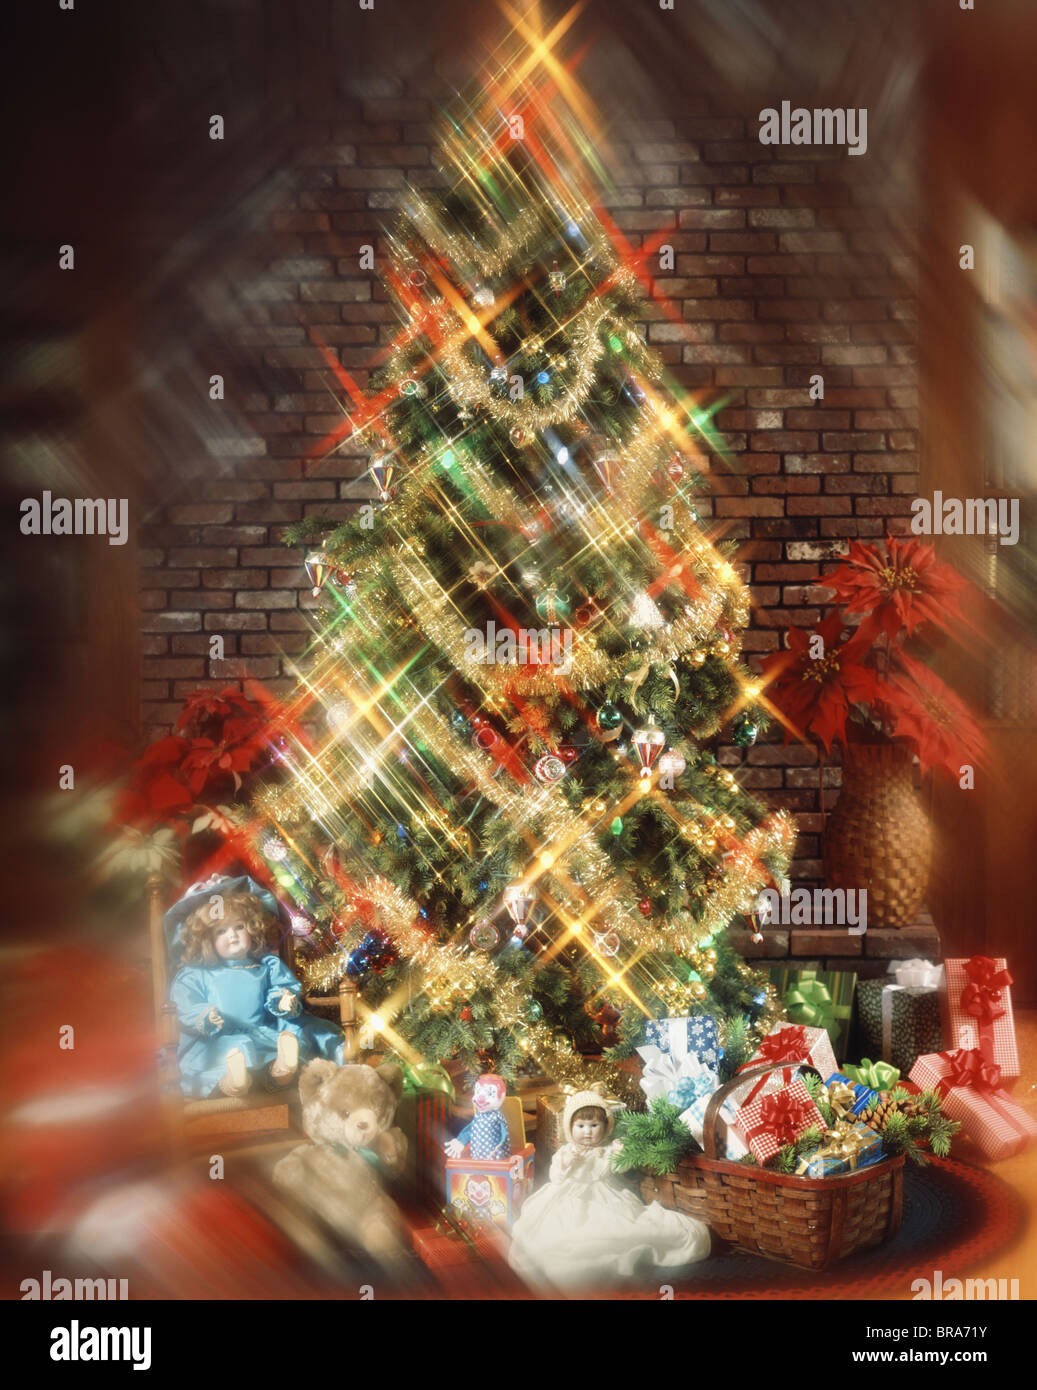 CHRISTMAS TREE WITH DEOCRATONS GARLAND LIGHTS TOYS AND PRESENTS UNDER TREE BLURRED EFFECT Stock Photo